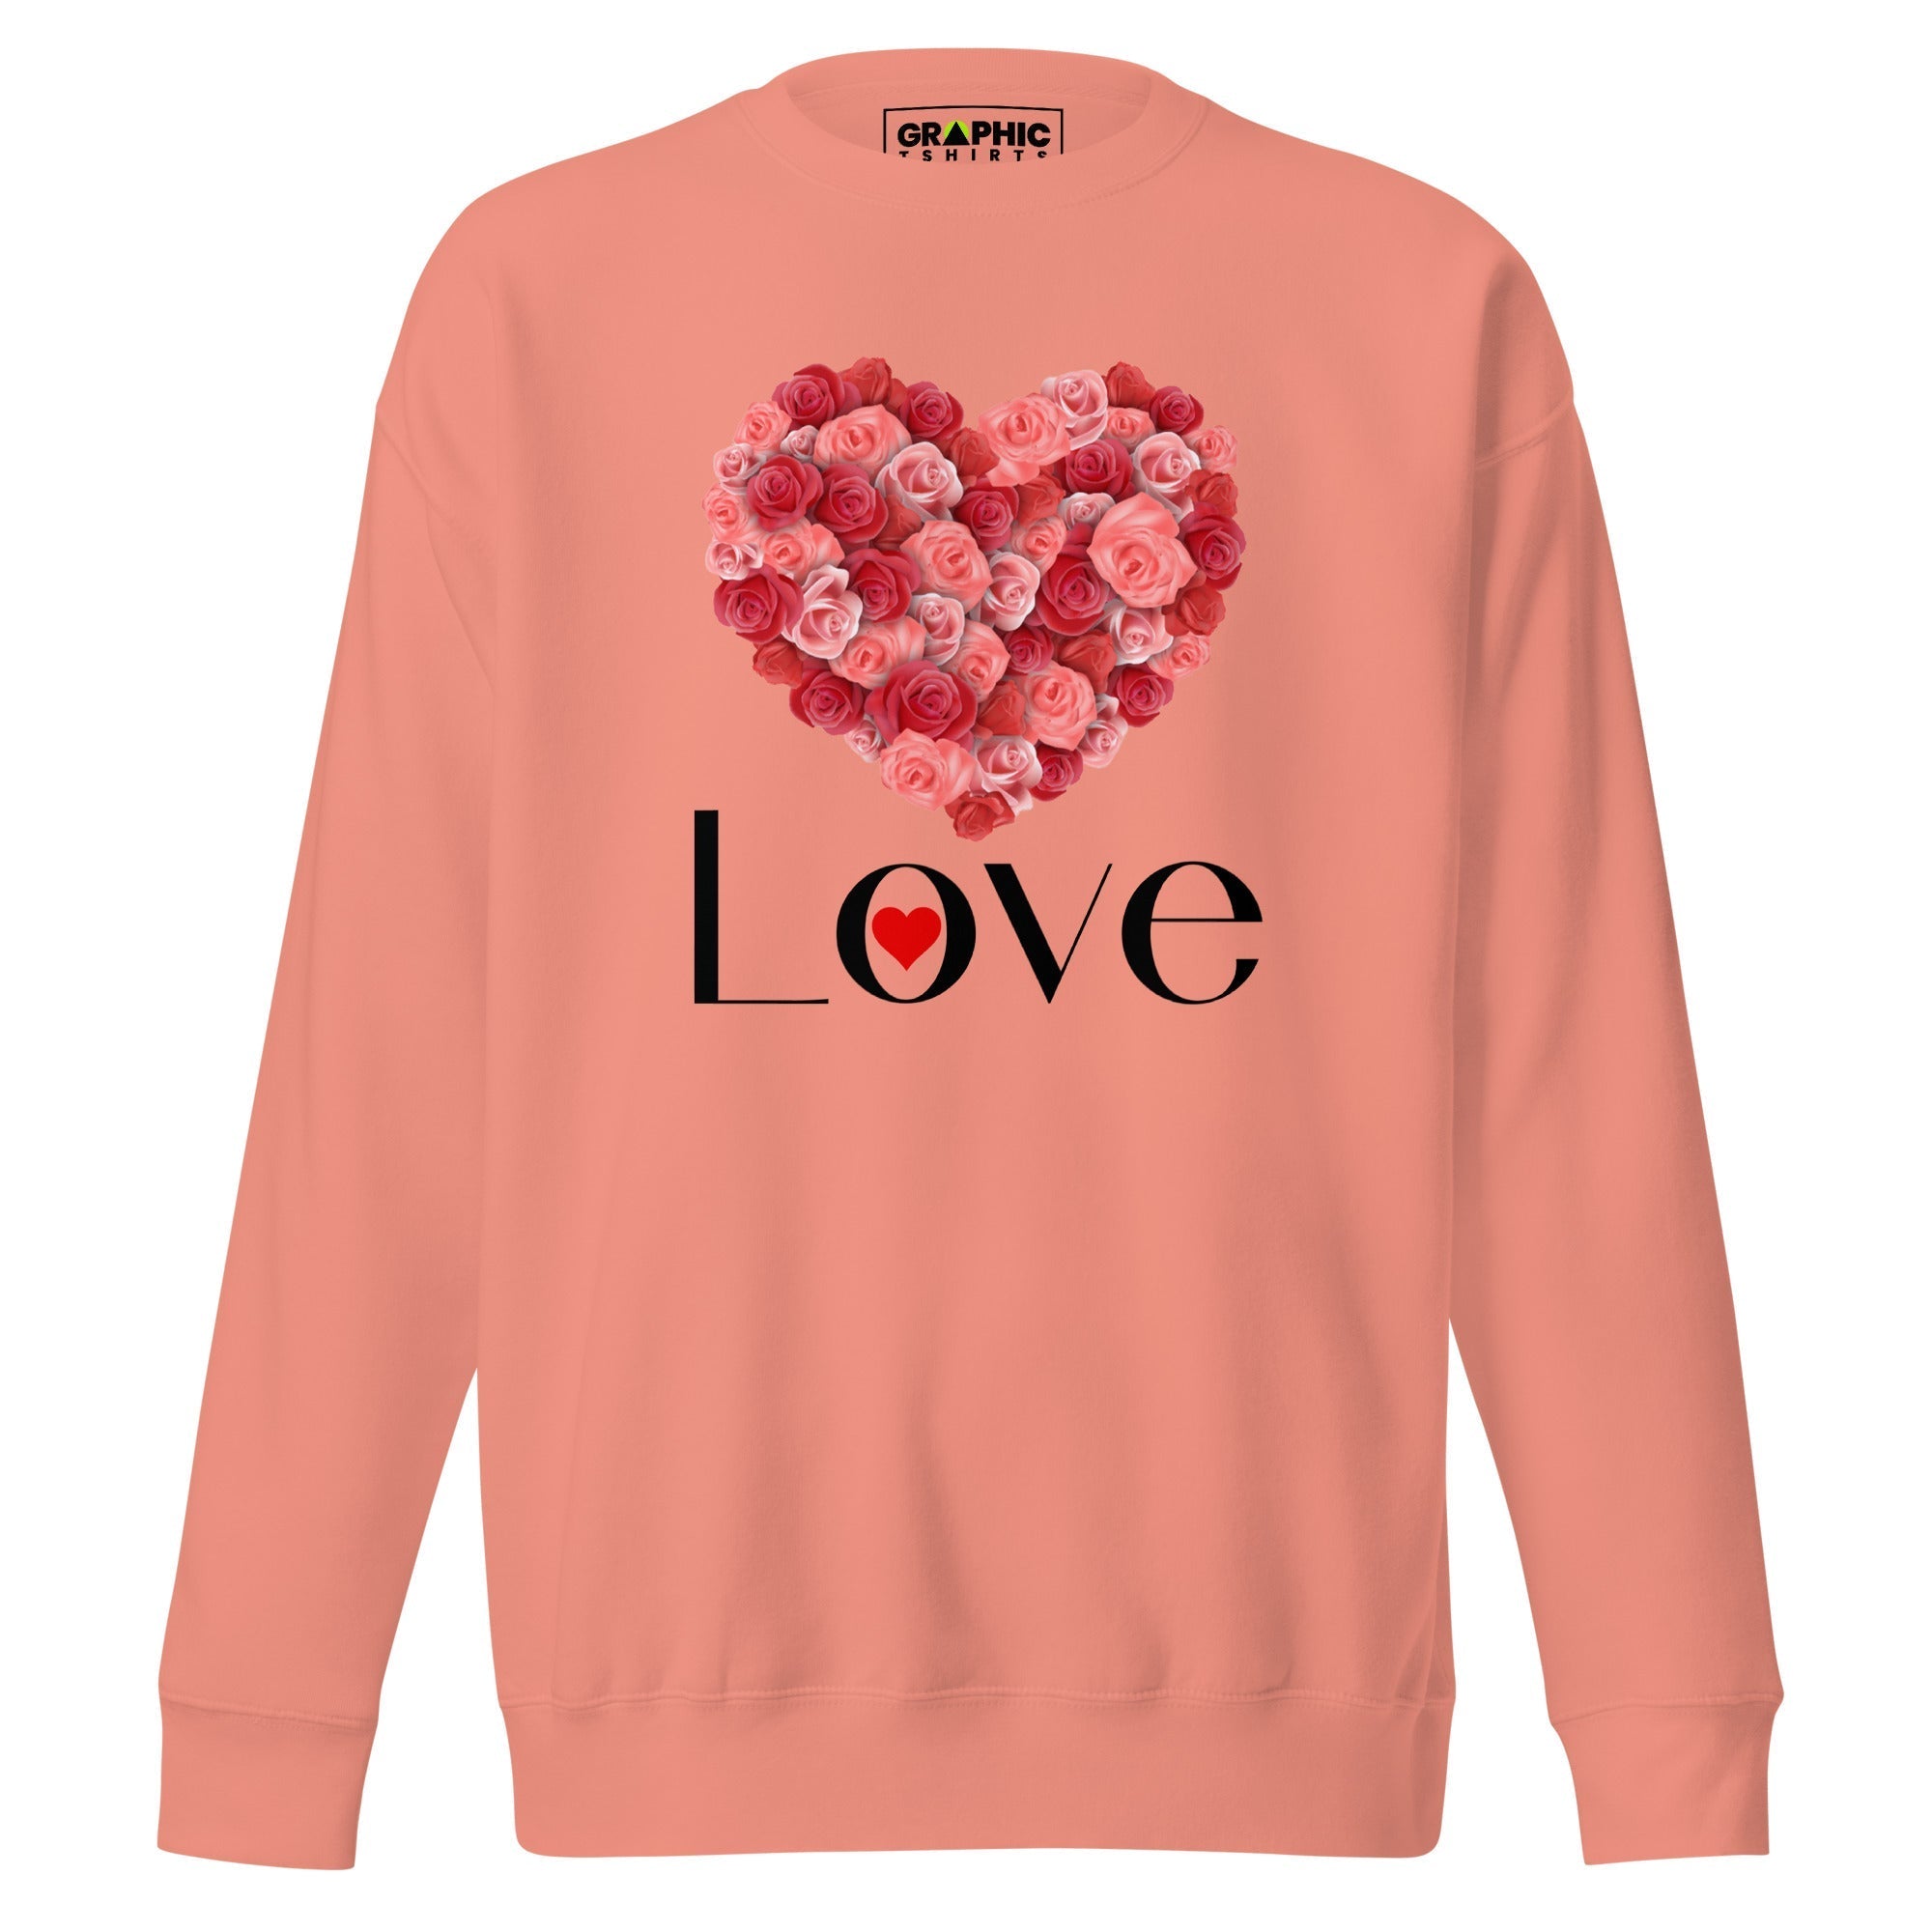 Women's Premium Sweatshirt - Love Hearts Red And Pink Roses - GRAPHIC T-SHIRTS